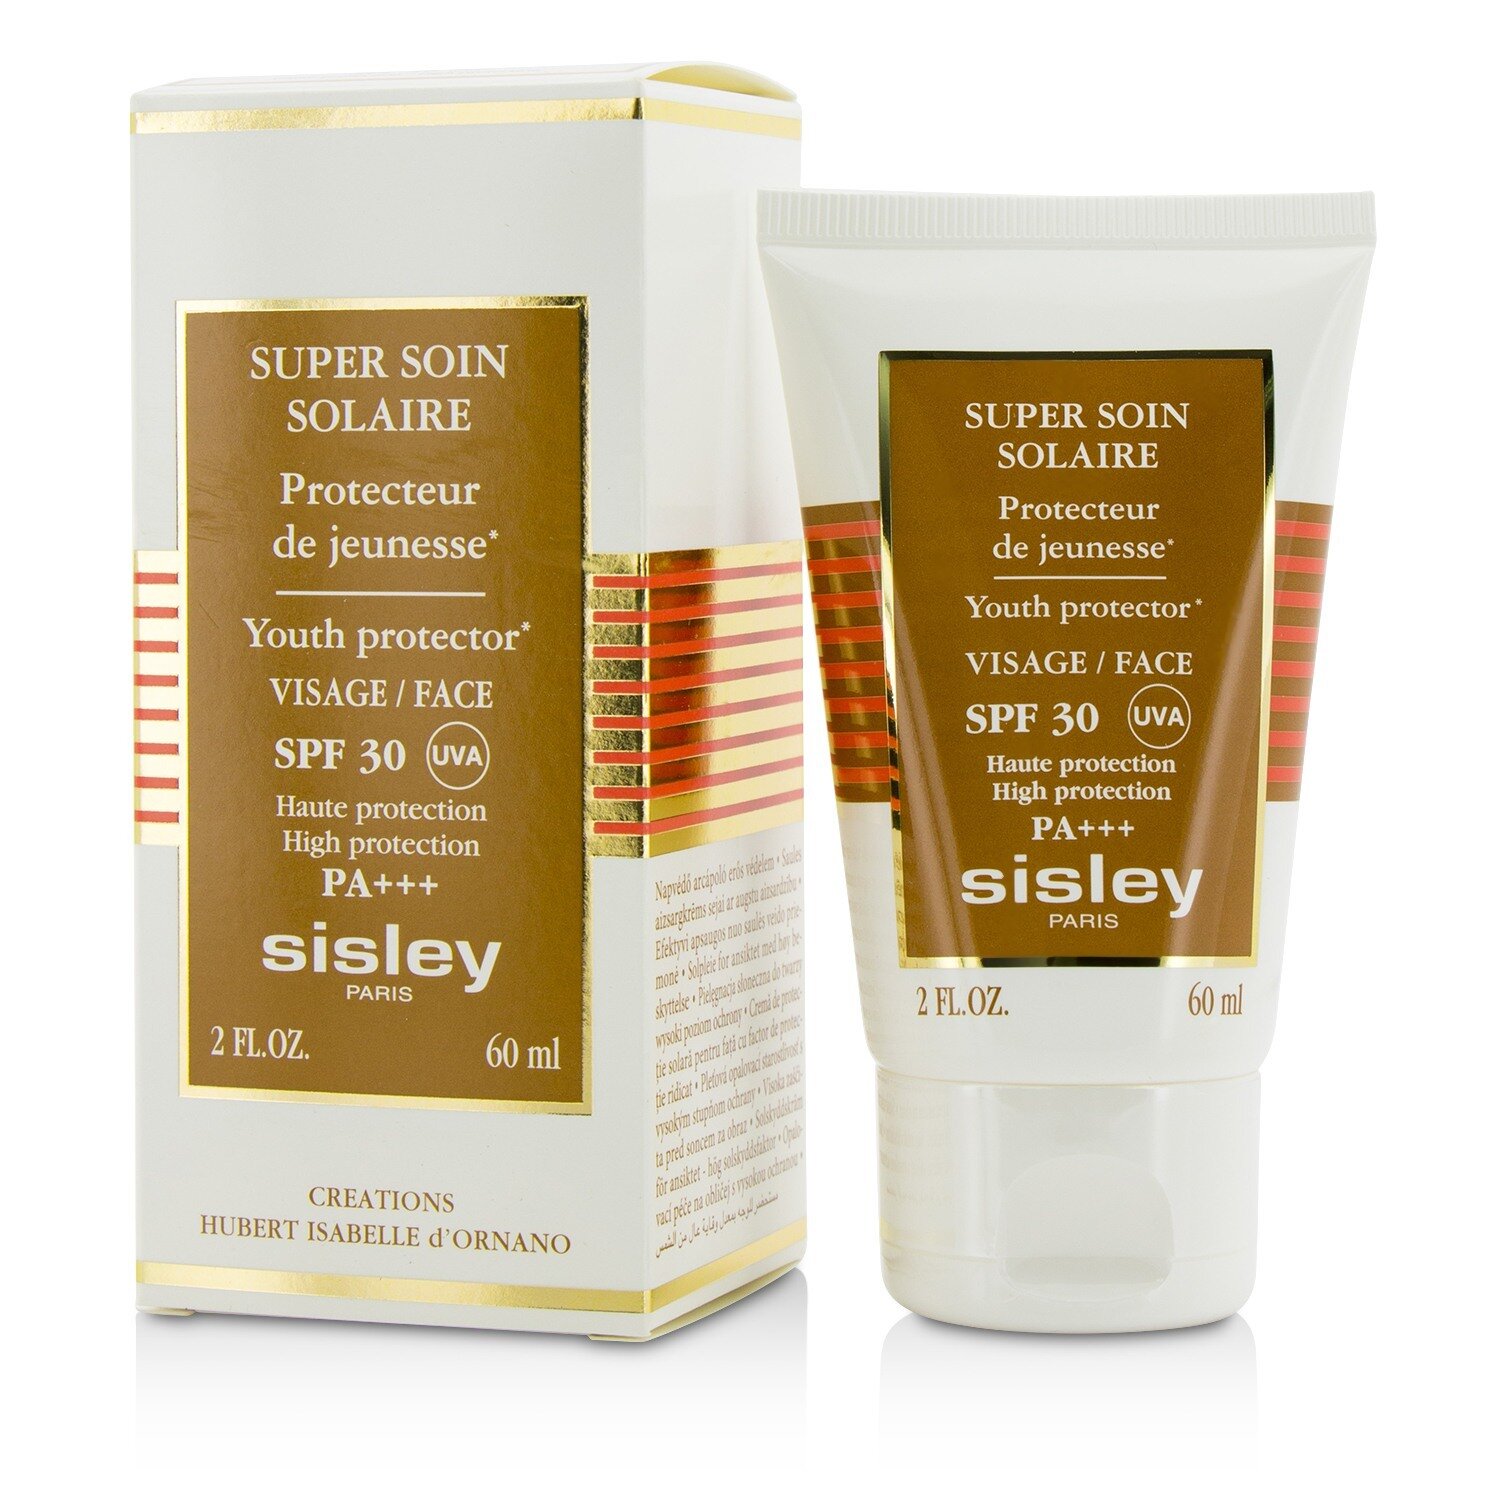 Photos - Sun Skin Care Sisley Paris Super Soin Solaire Youth Protector For Face SPF 30 PA+++